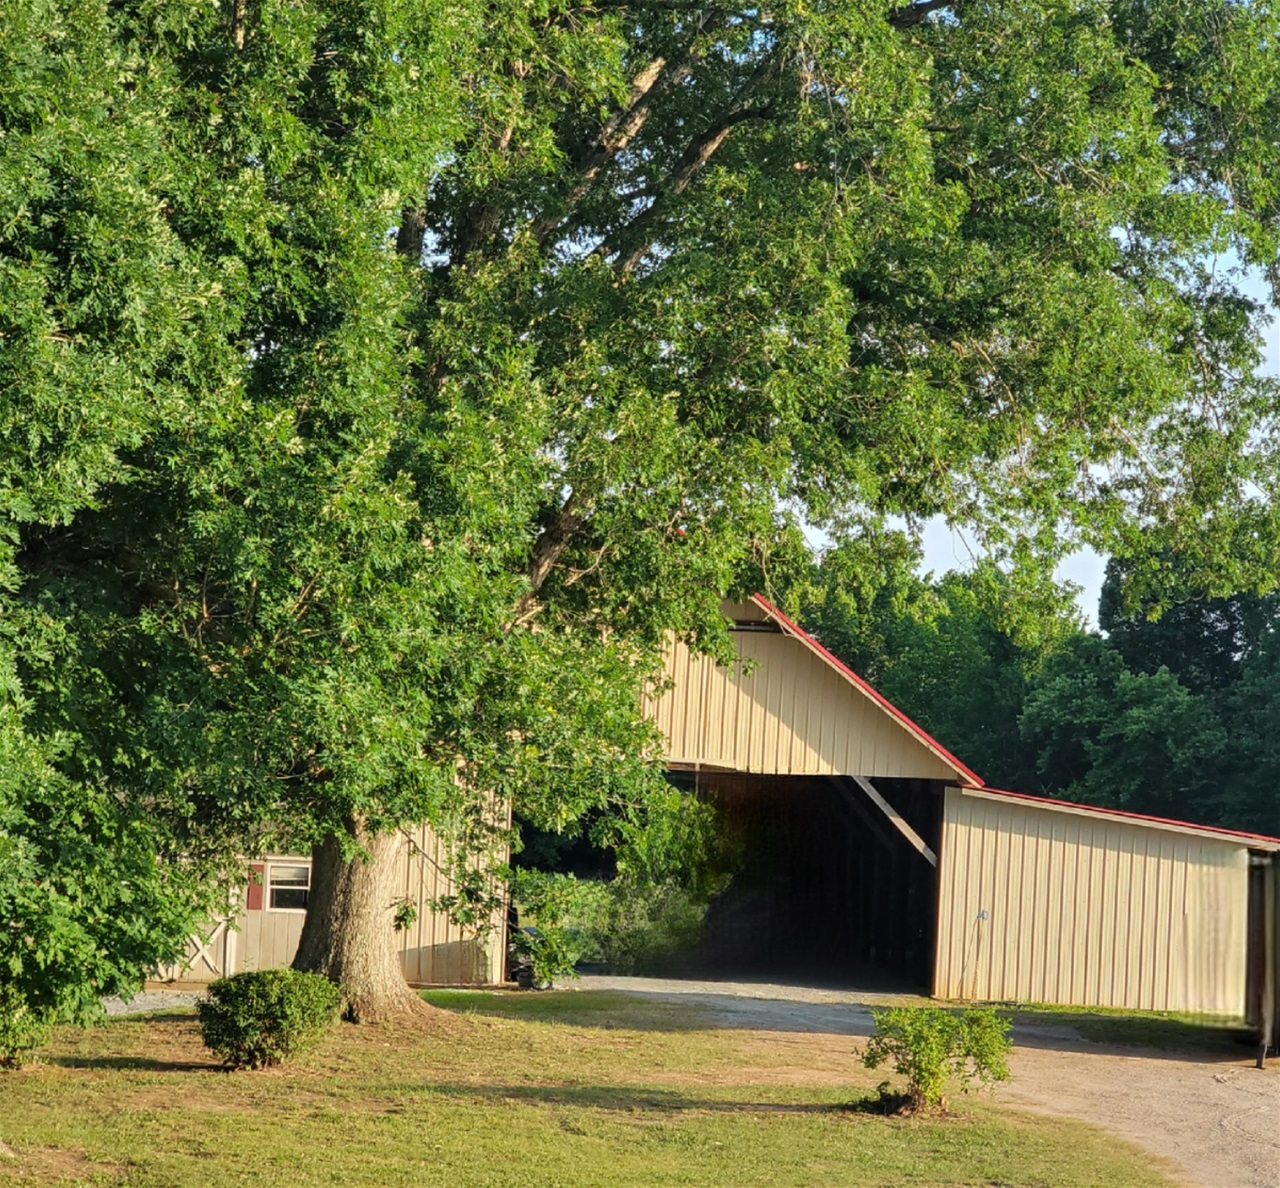 Front view of barn in summer